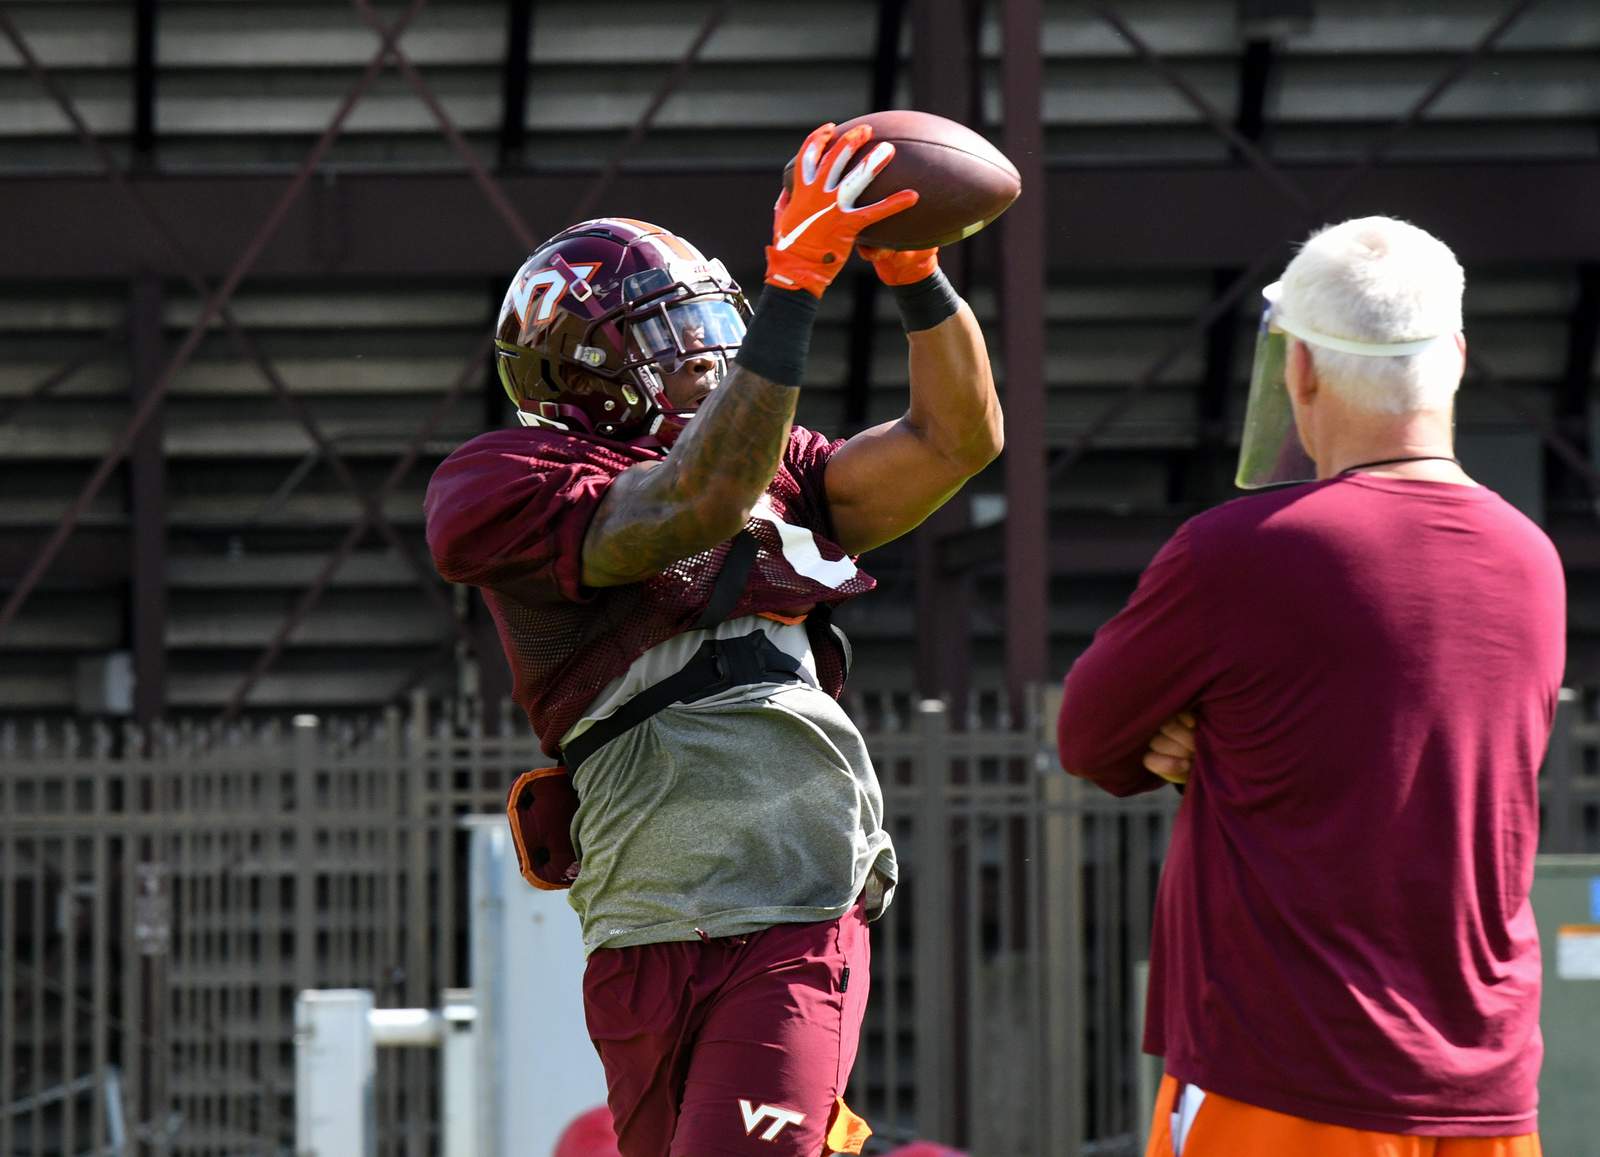 Revitalized rushing attack could make a difference for the Hokies